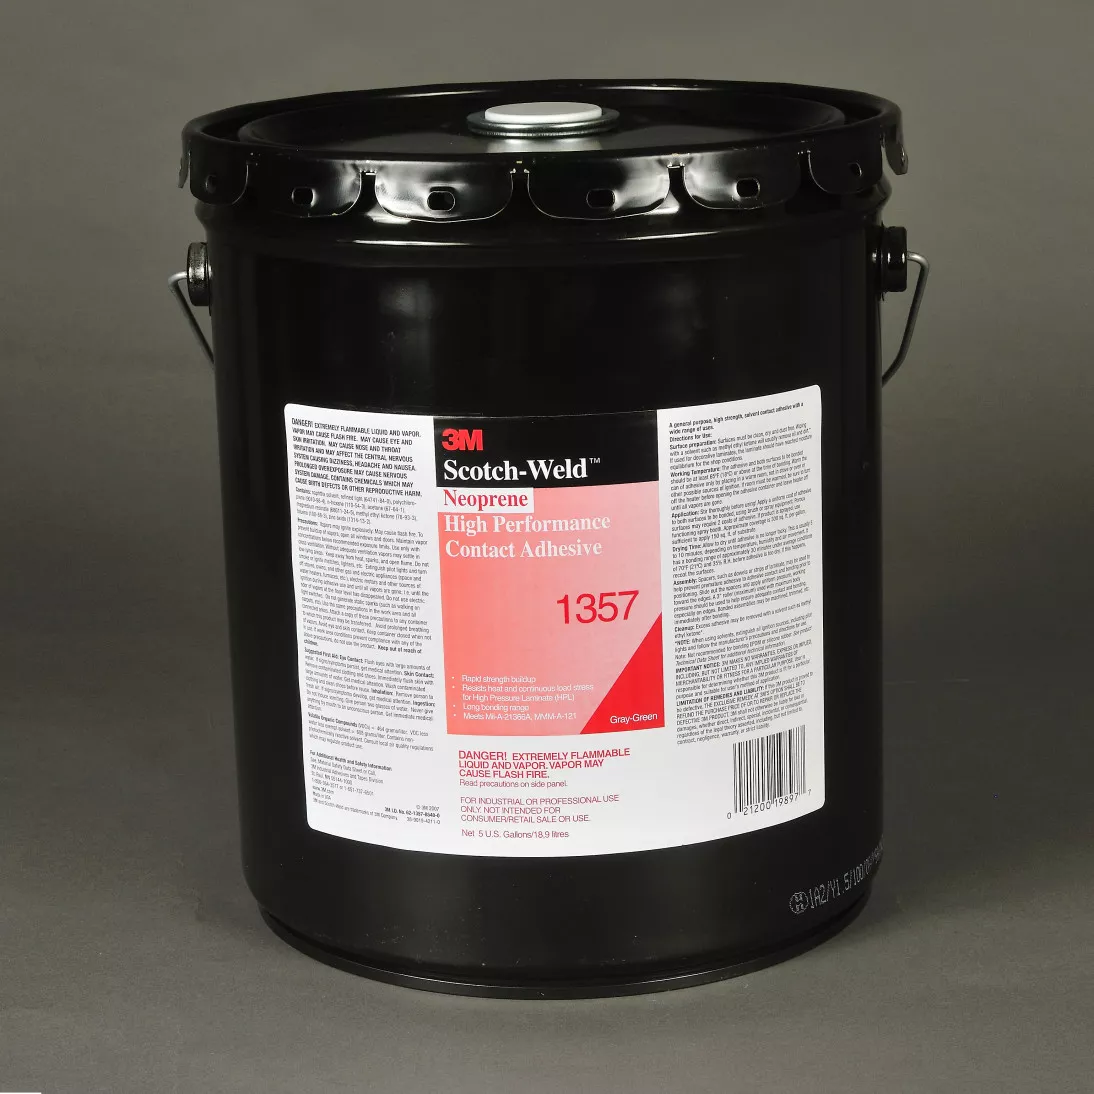 3M™ Neoprene High Performance Contact Adhesive 1357, Gray-Green, 5
Gallon Pour Spout Drum (Pail)